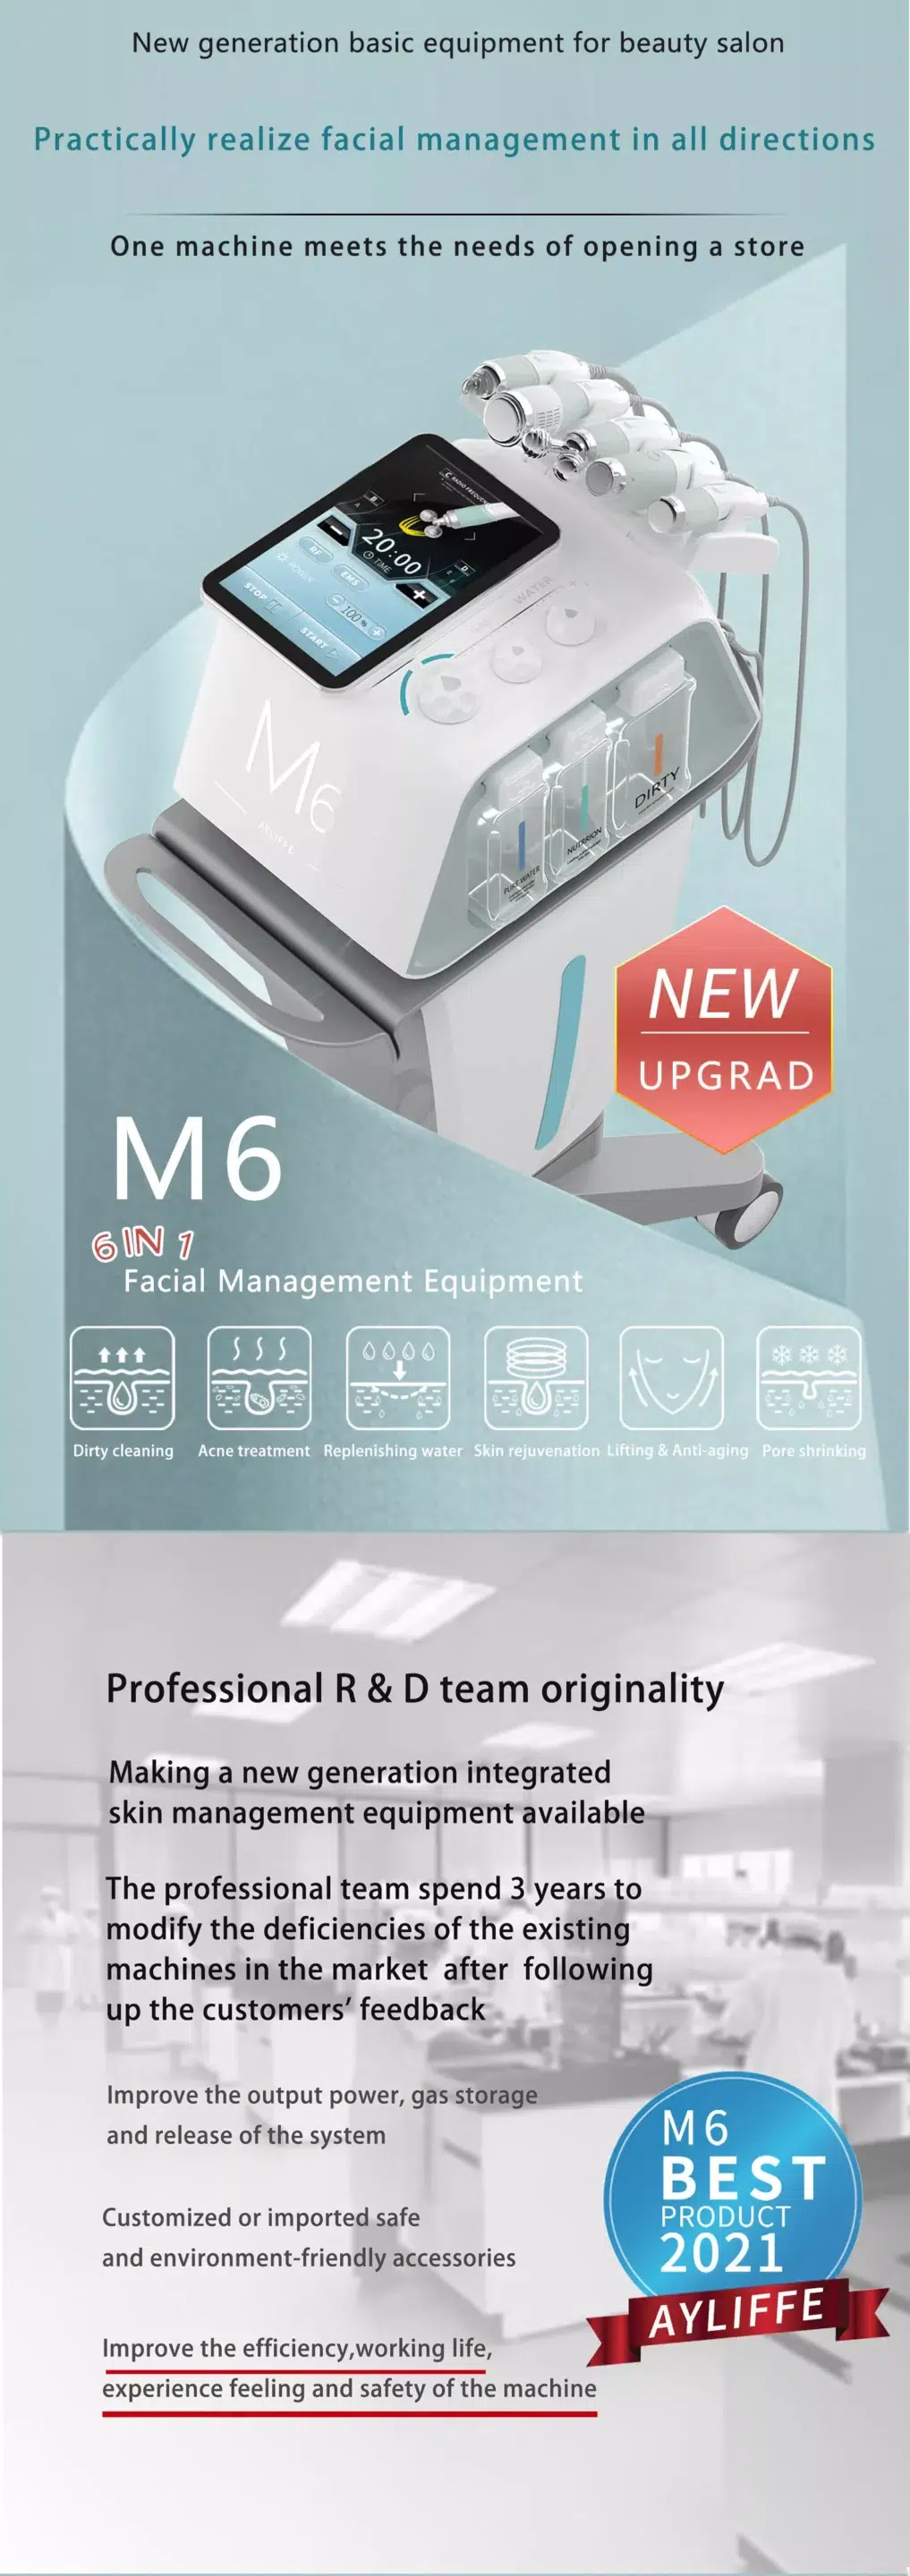 New generation 6 in 1 M6 Face management Machine